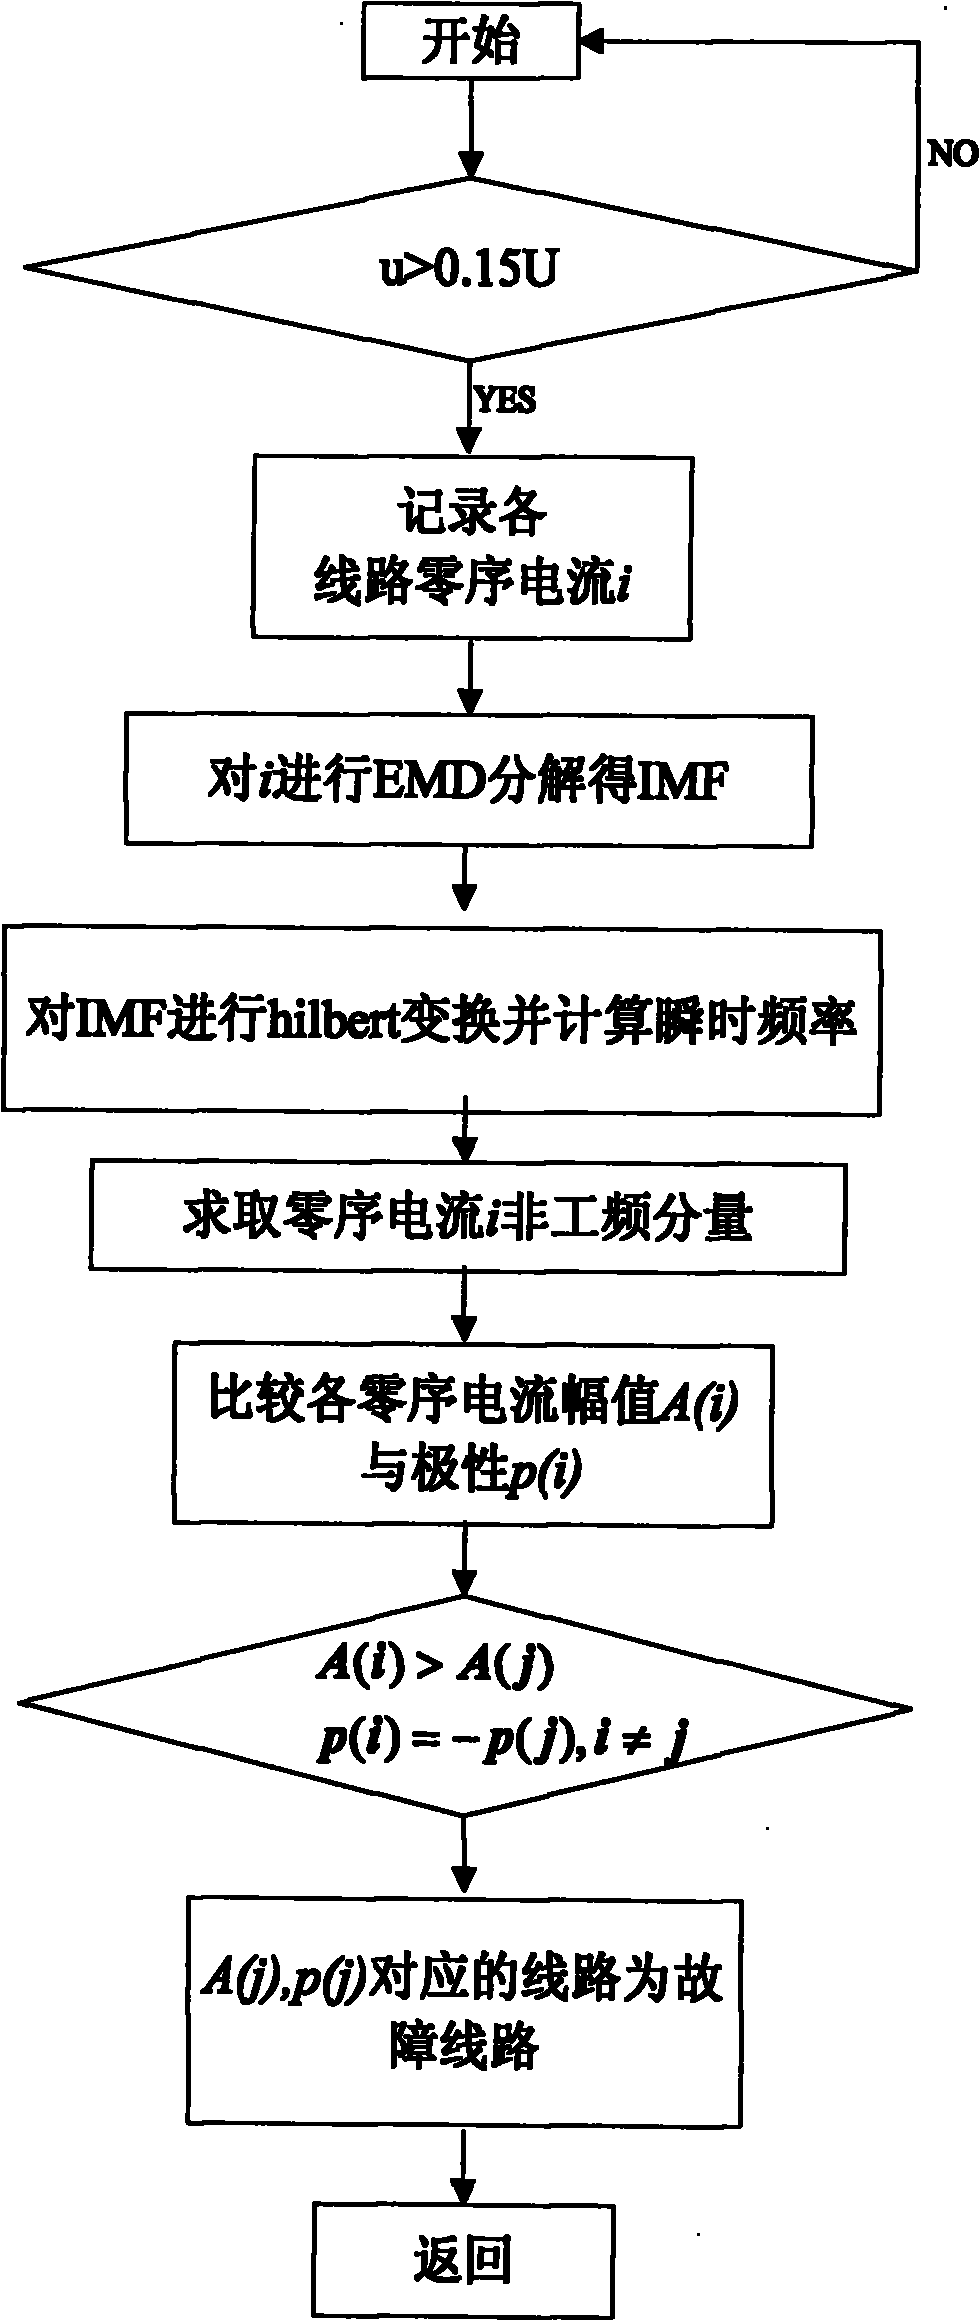 Distribution network fault line selection method using non-power frequency transient state component